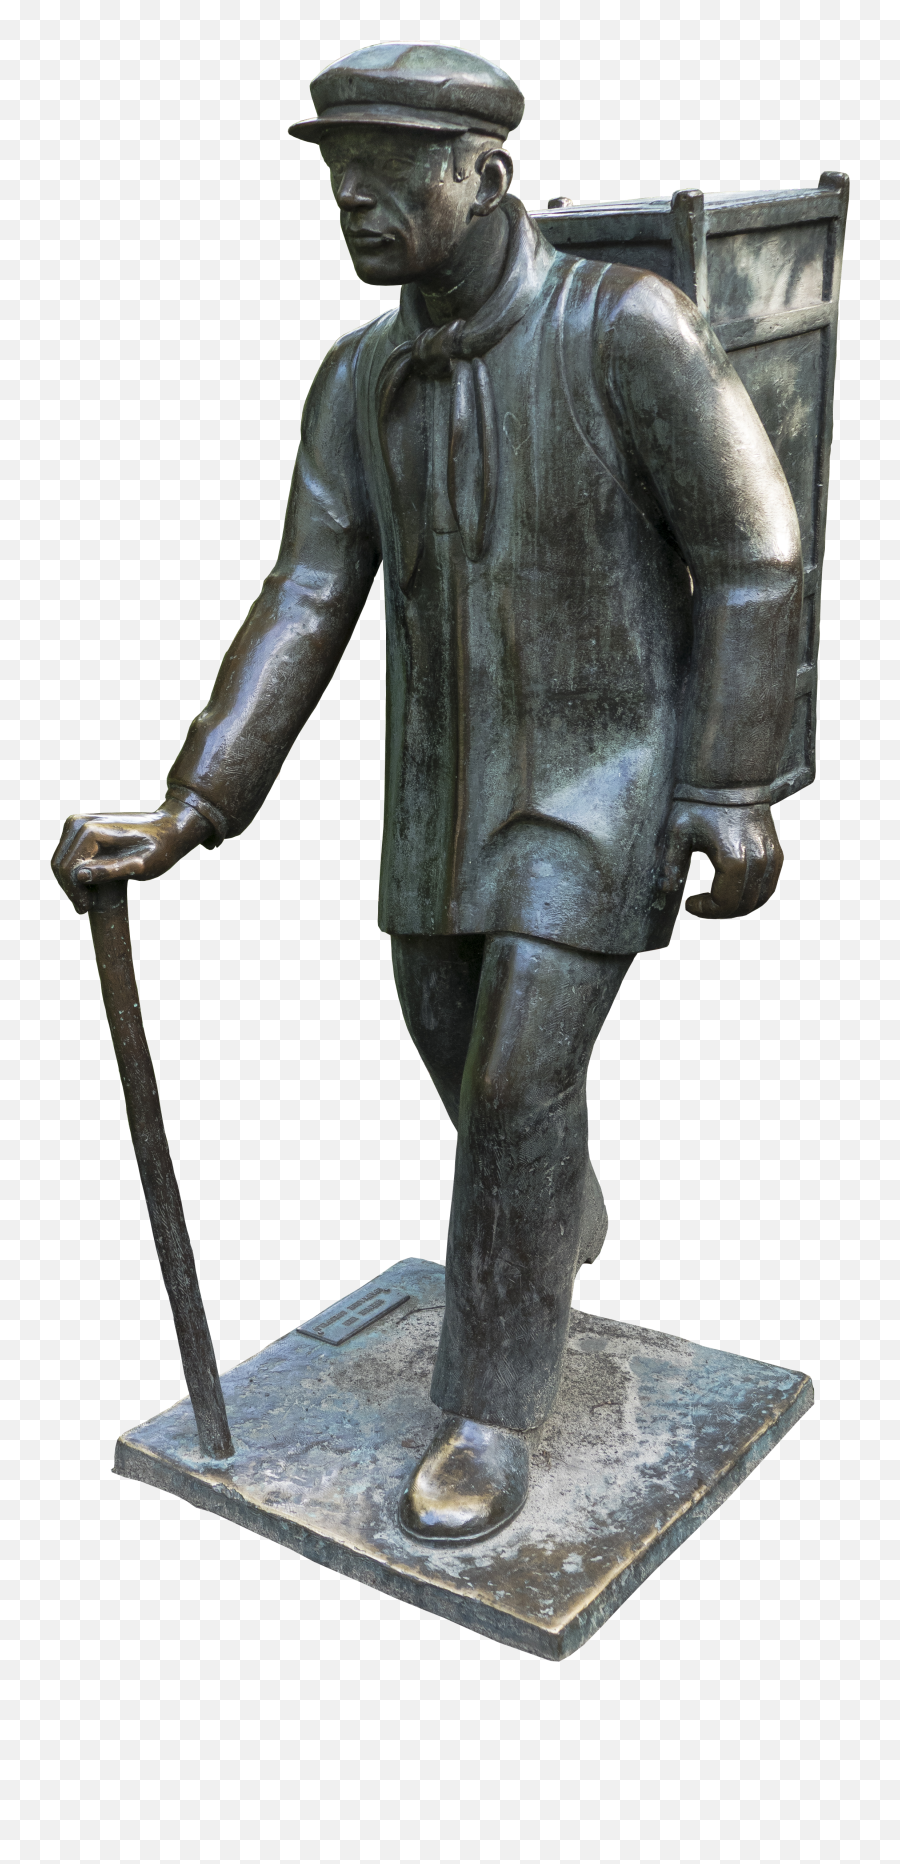 Png Images Statue - Kiepenkerl,Statue Png